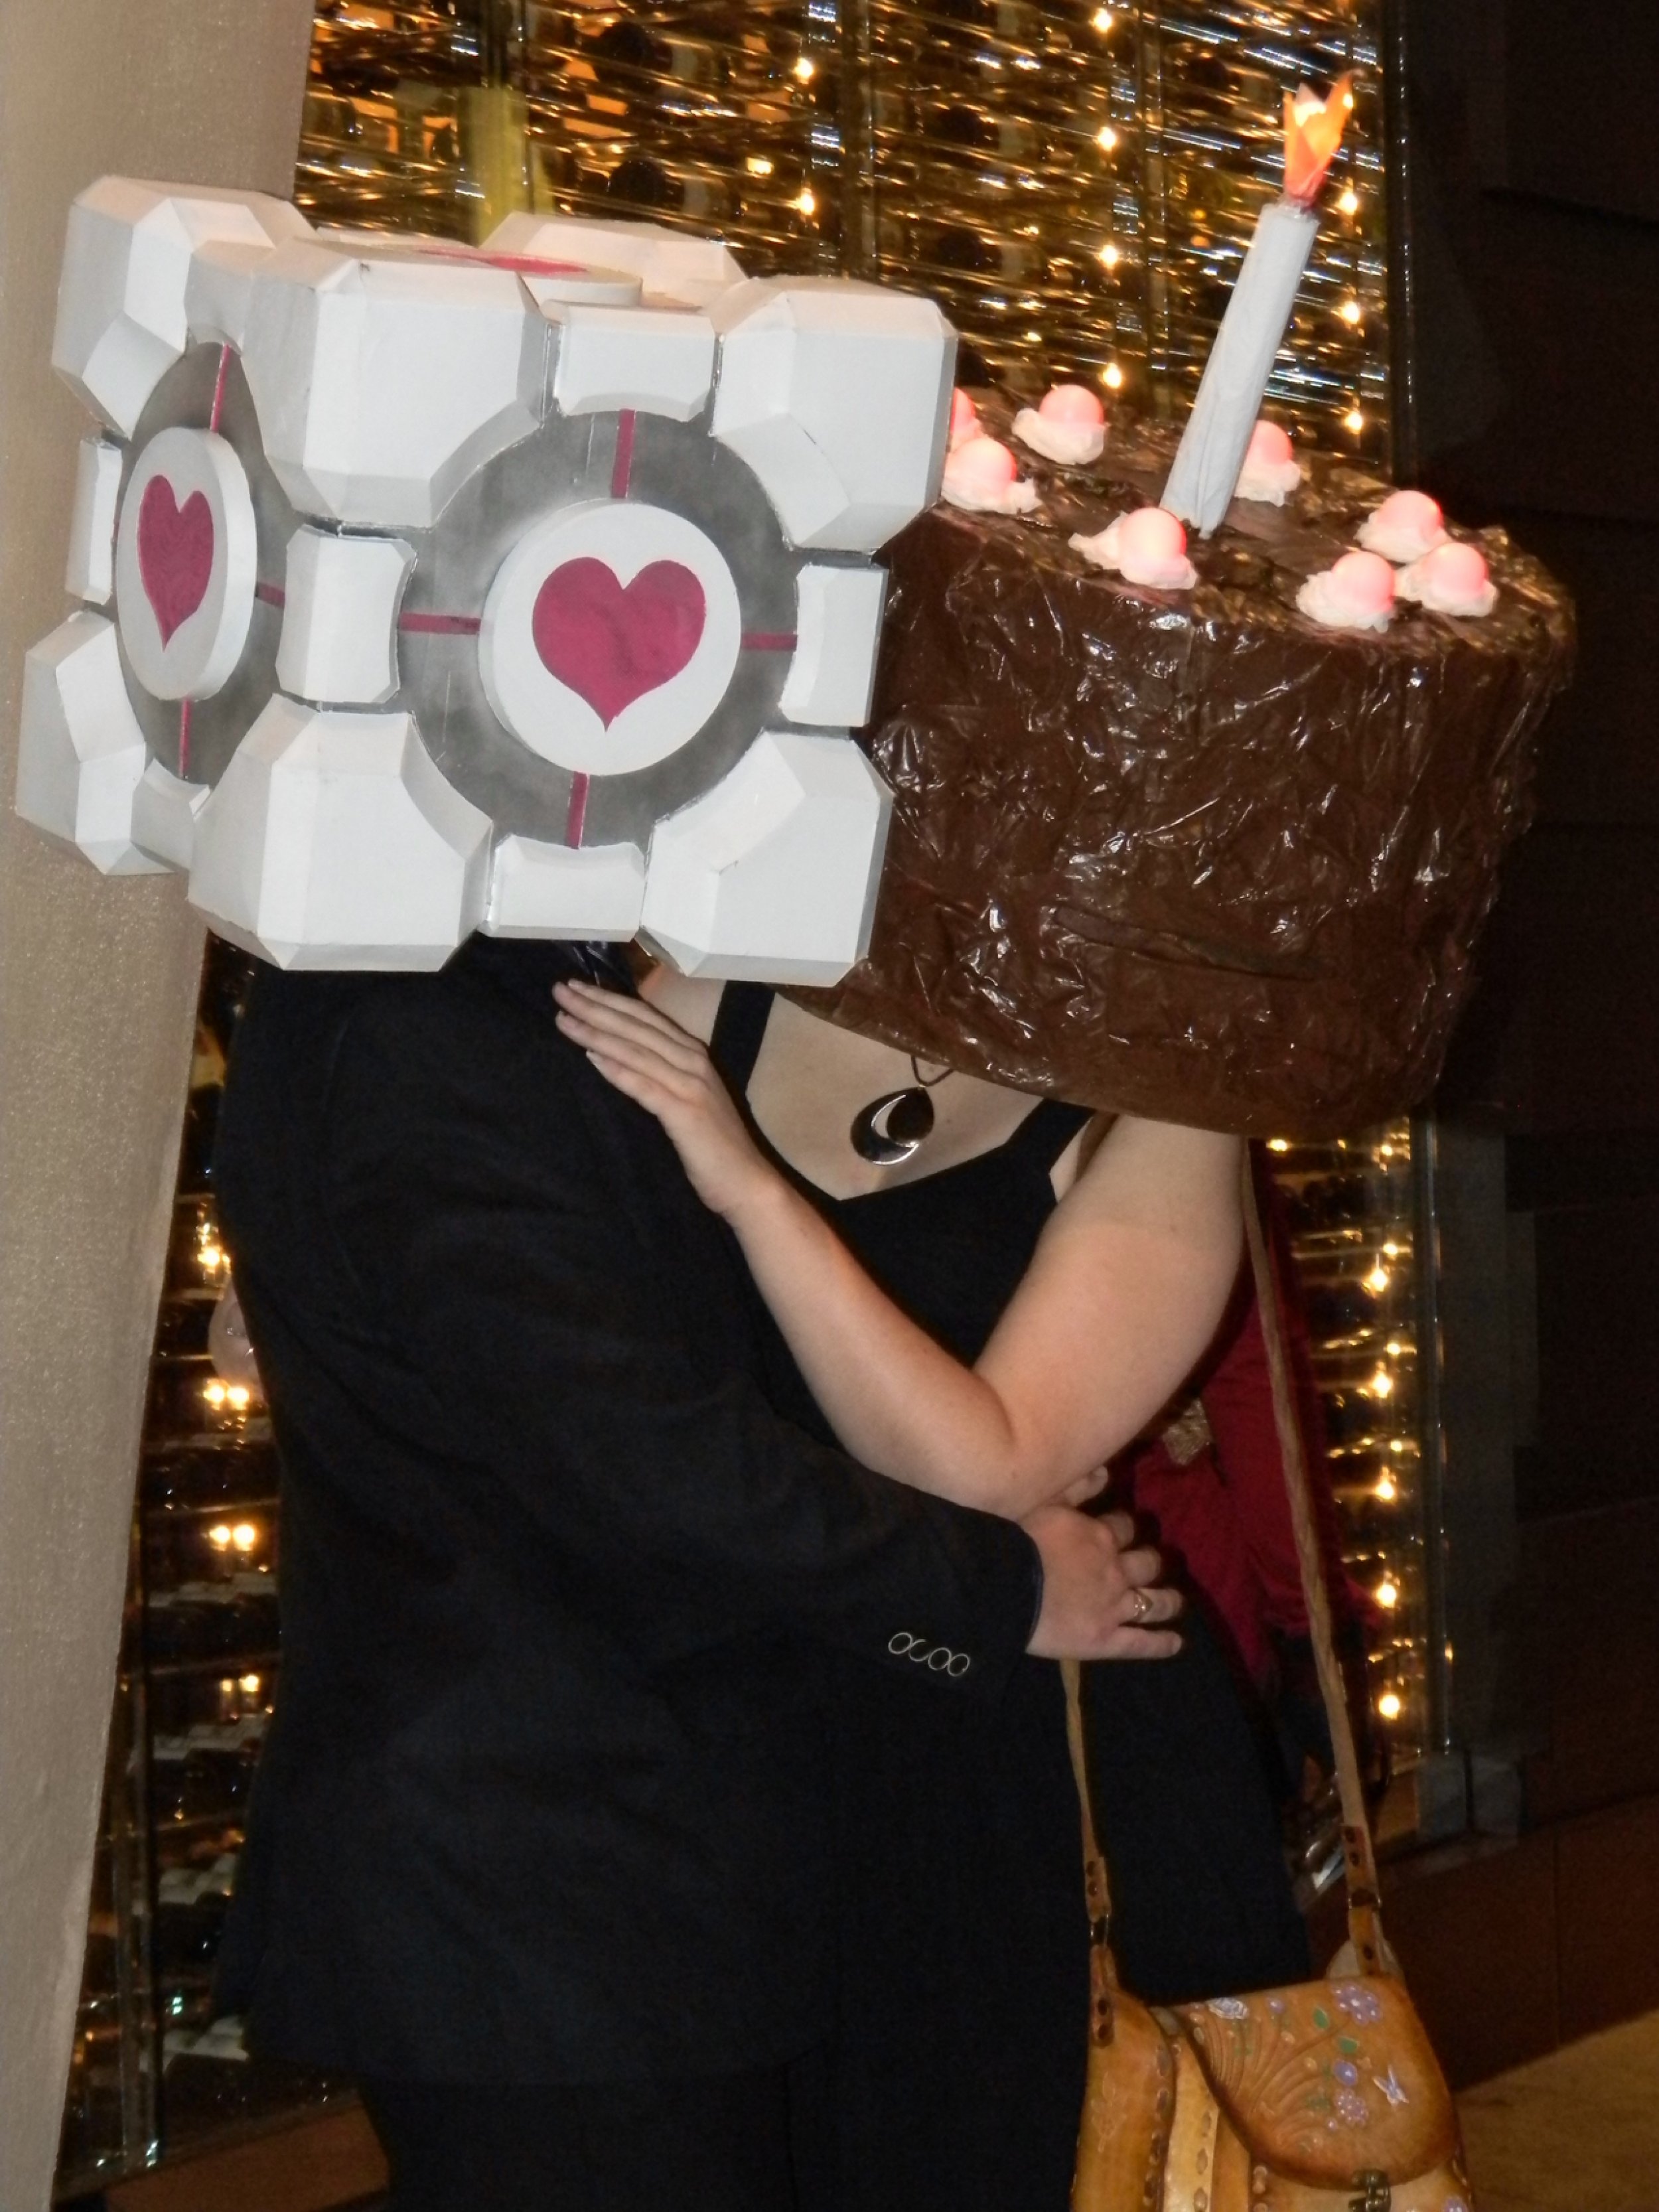 Companion Cube and Cake from Portal